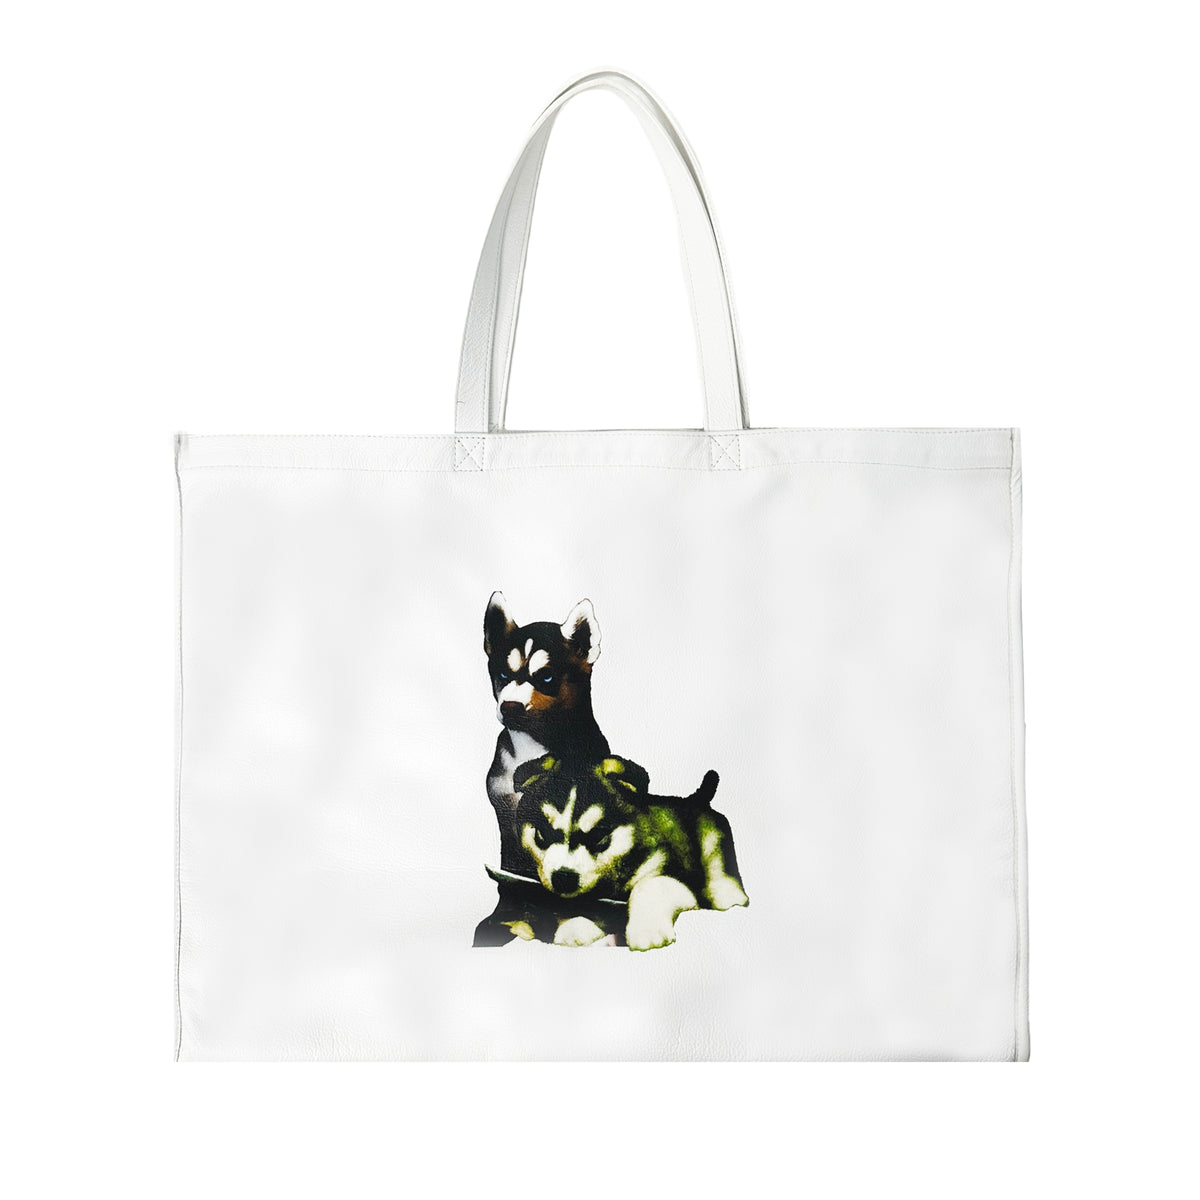 'PUPPIES' TOTE - SNOW